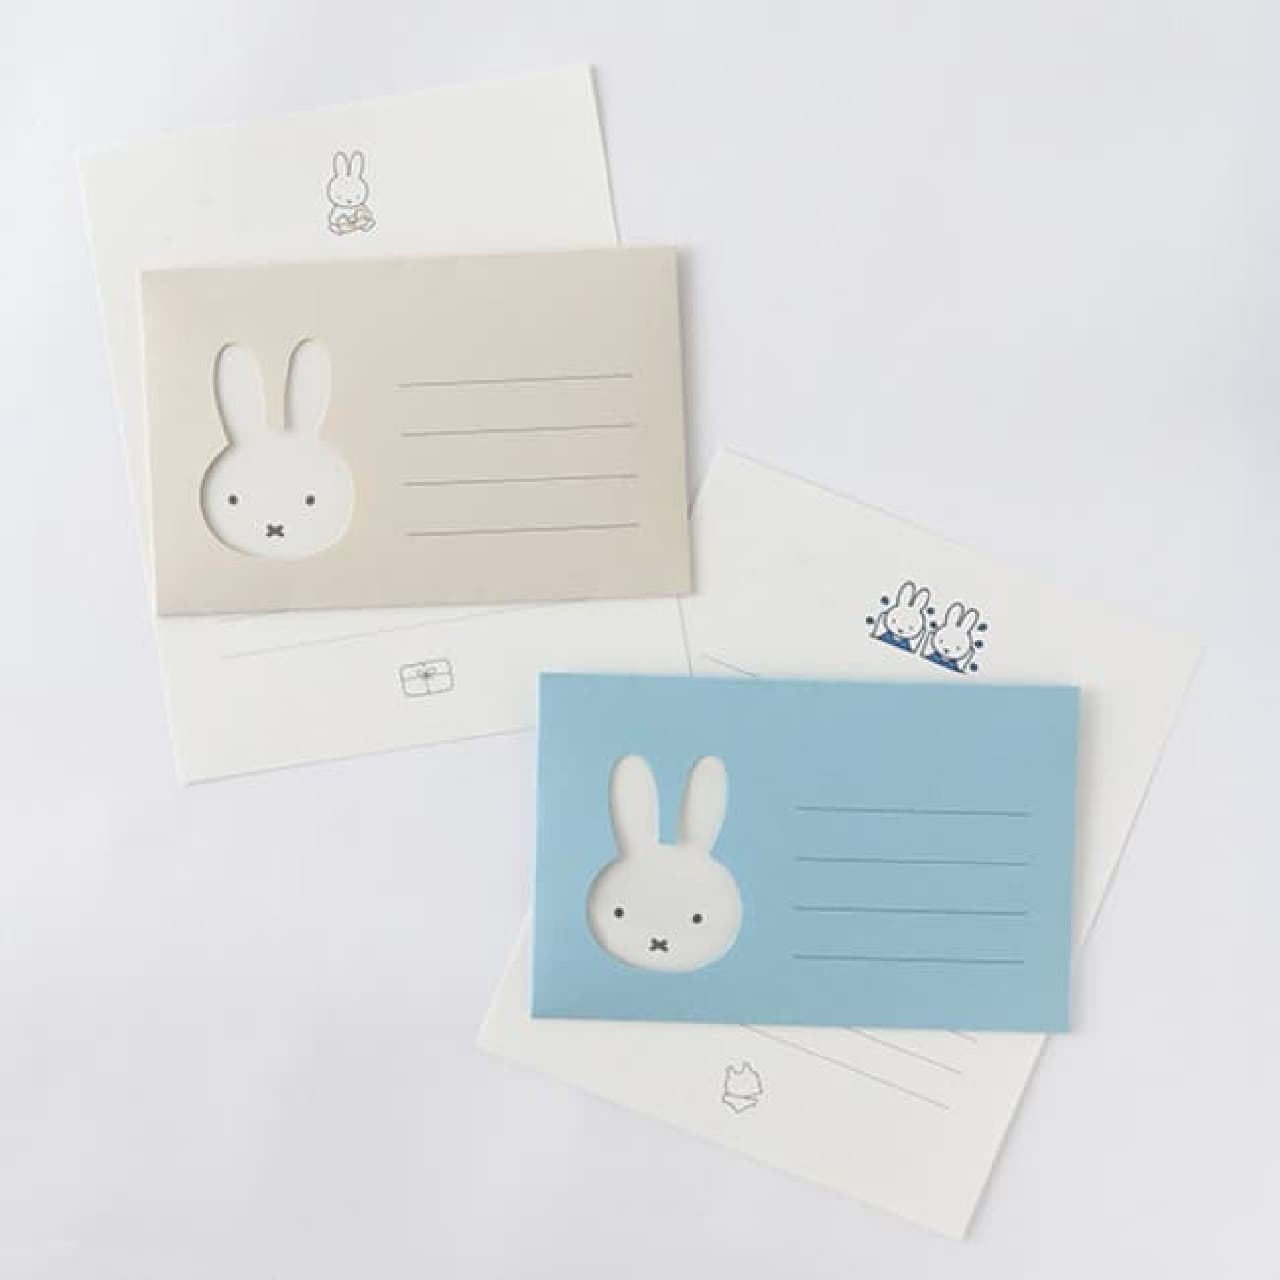 Miffy's new stationery at Vile Van -- cute notebooks, letter sets, zipper bags, etc.